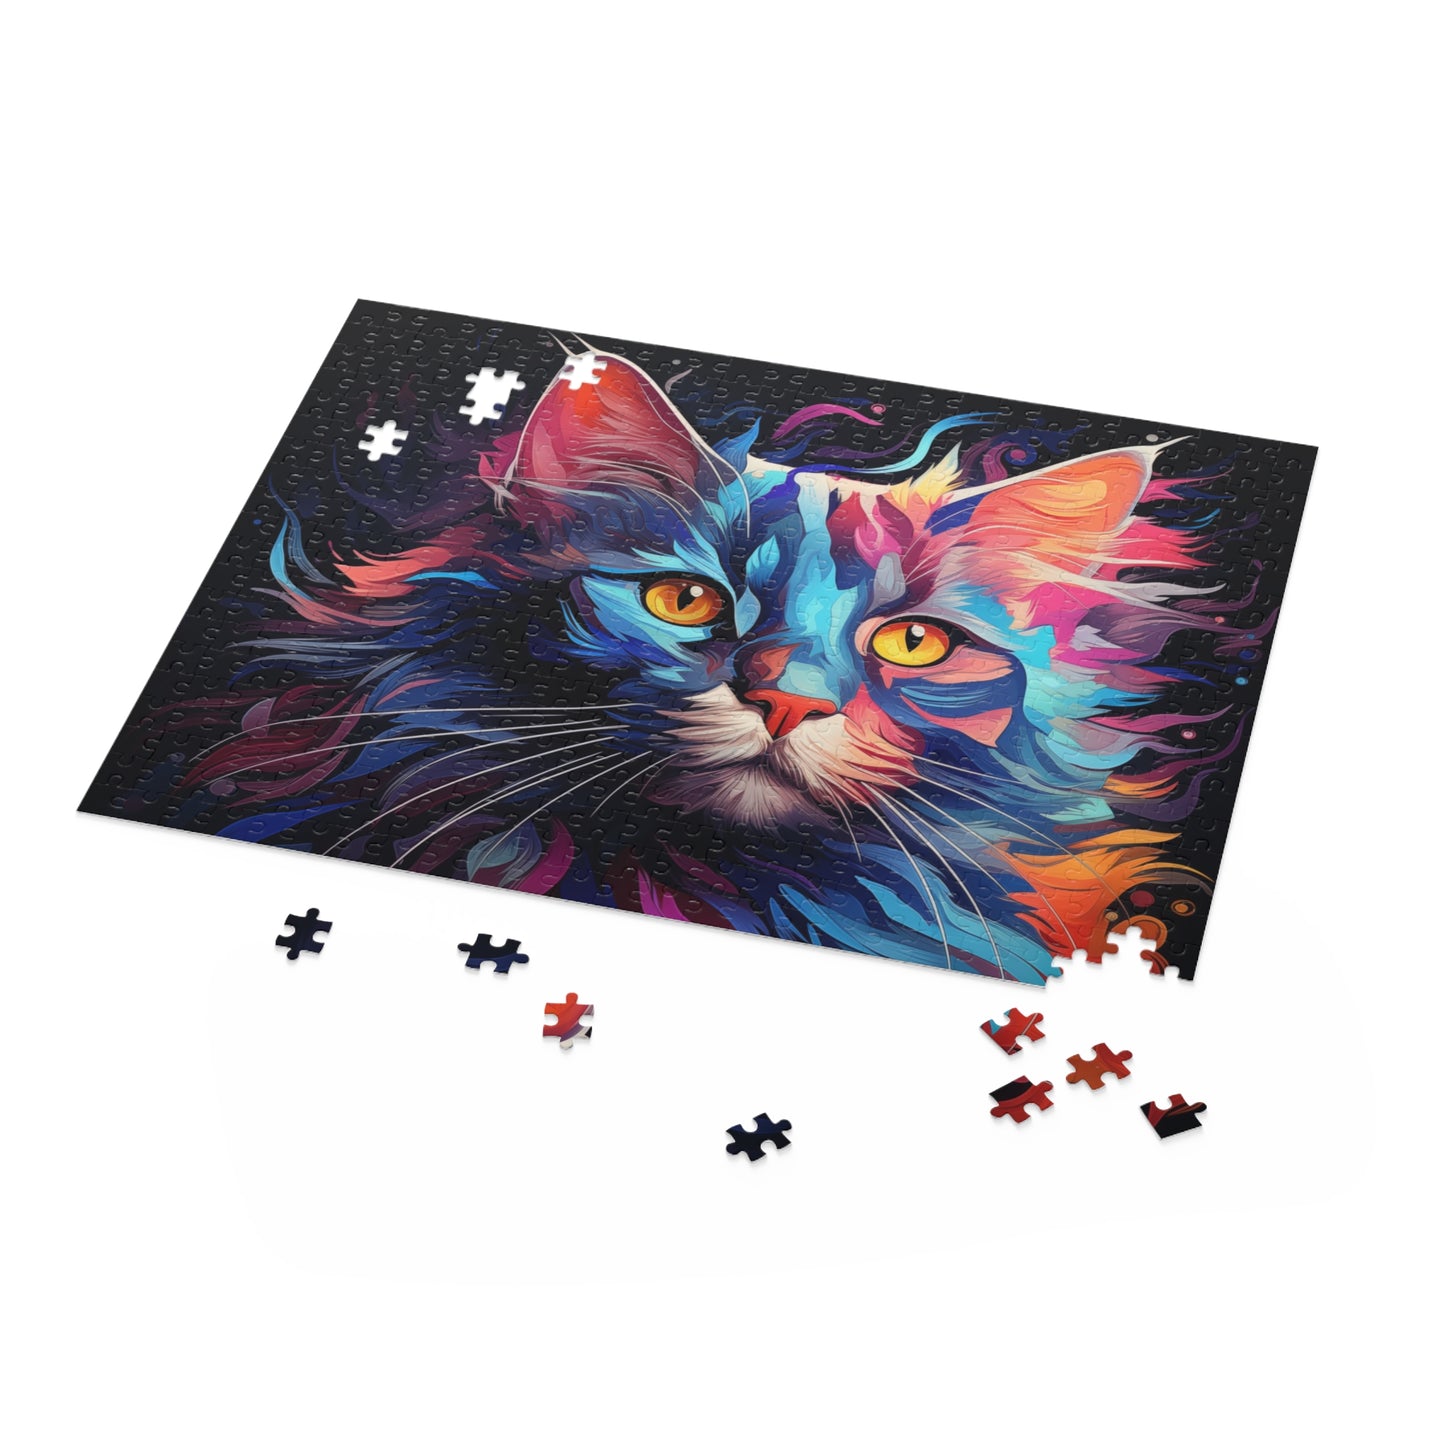 Copy of Abstract Cat Oil Paint Jigsaw Puzzle Adult Birthday Business Jigsaw Puzzle Gift for Him Funny Humorous Indoor Outdoor Game Gift For Her Online-5